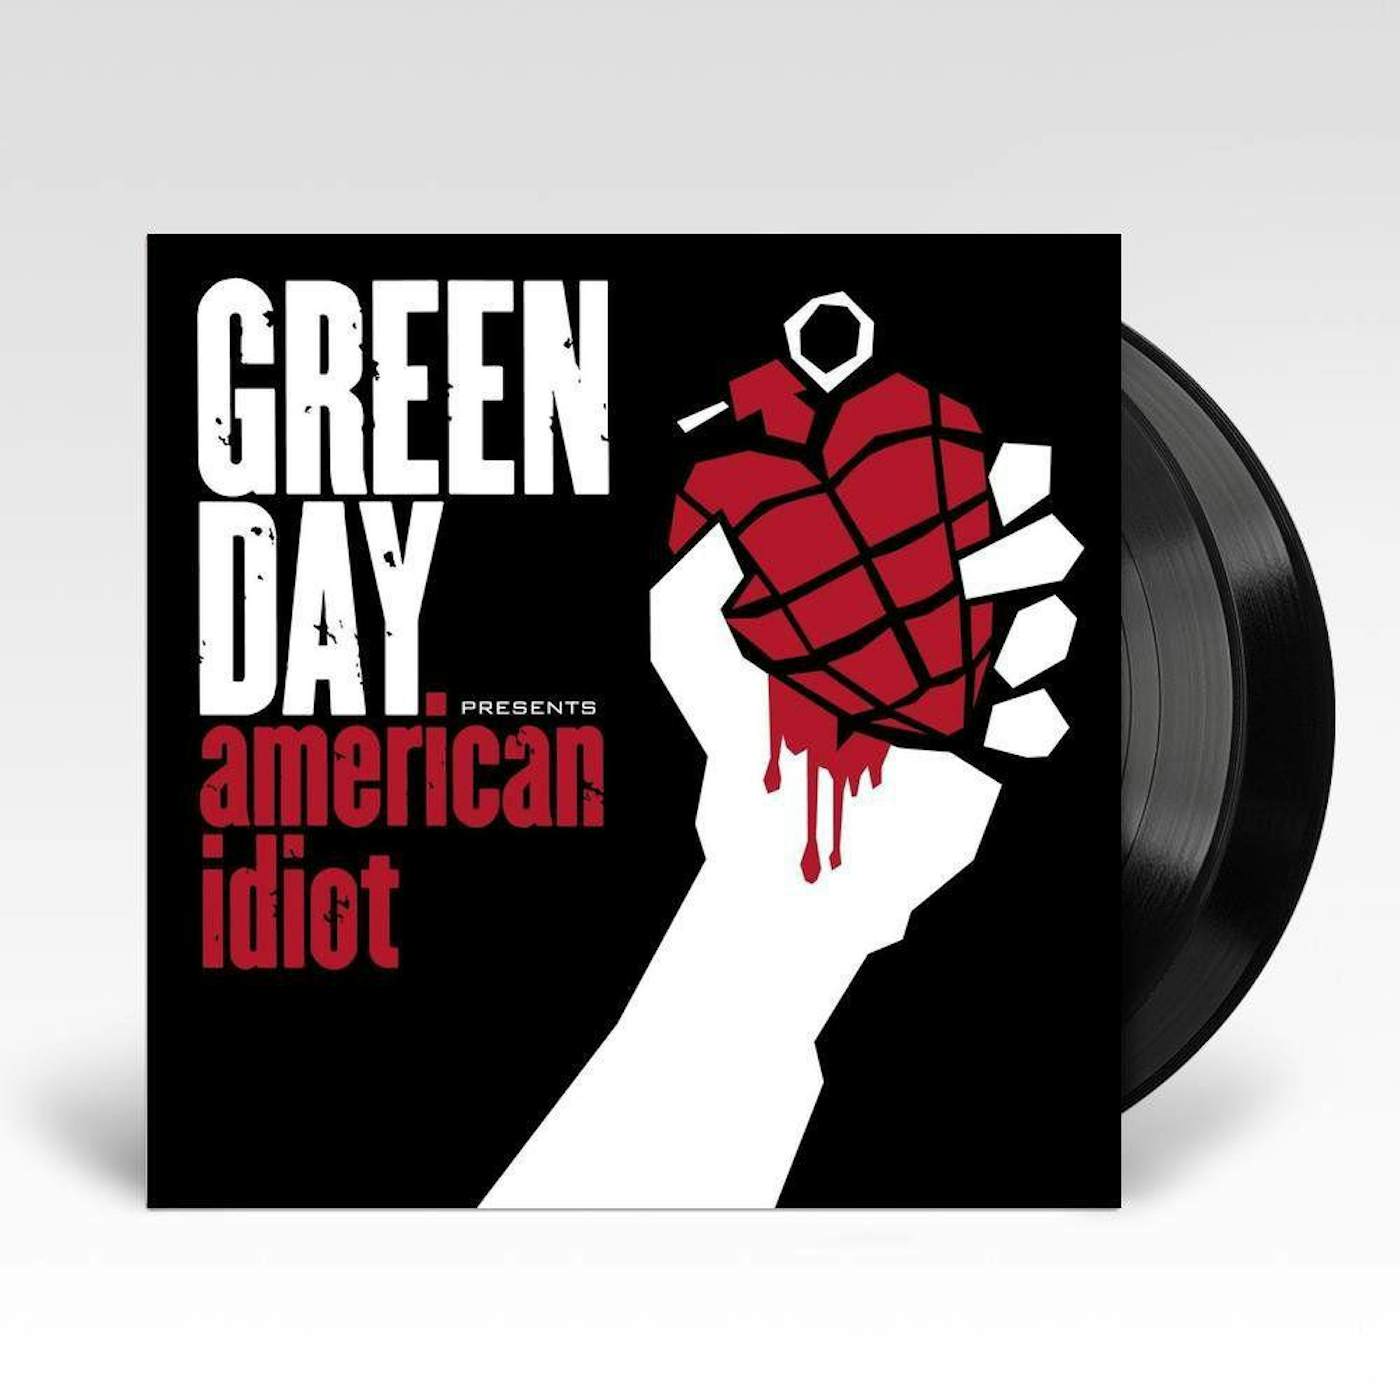 Green Day - American Idiot Framed Signature Gold LP Record Display M4 -  Gold Record Outlet Album and Disc Collectible Memorabilia